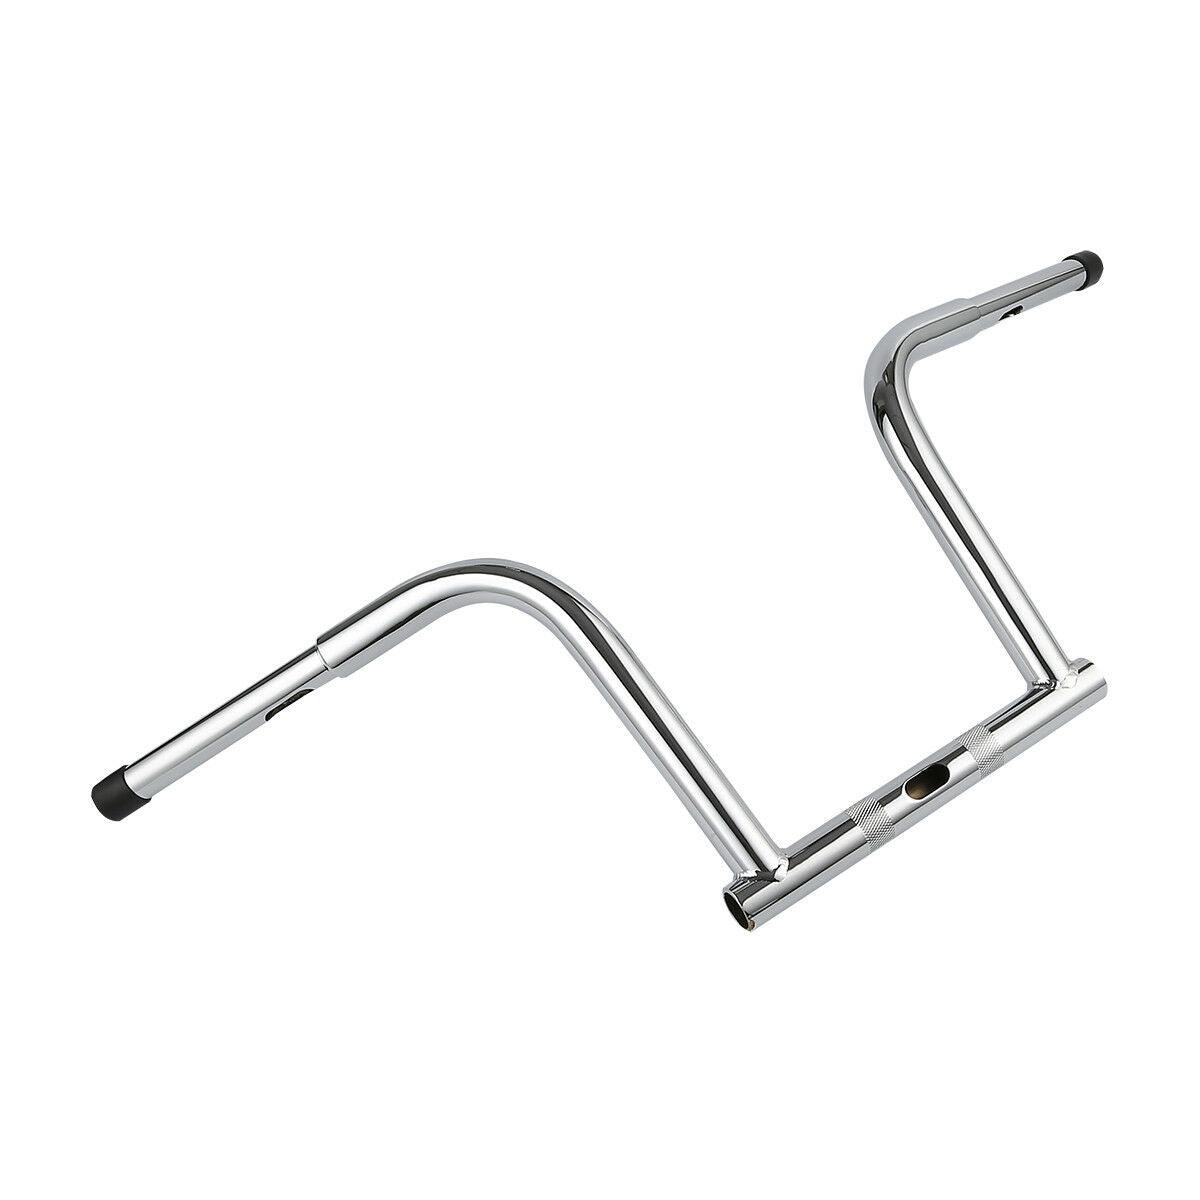 12" Rise 1 1/4'' Handlebar Fit For Harley Dyna Street Bob FXDB 06-17 FXDF 08-17 - Moto Life Products